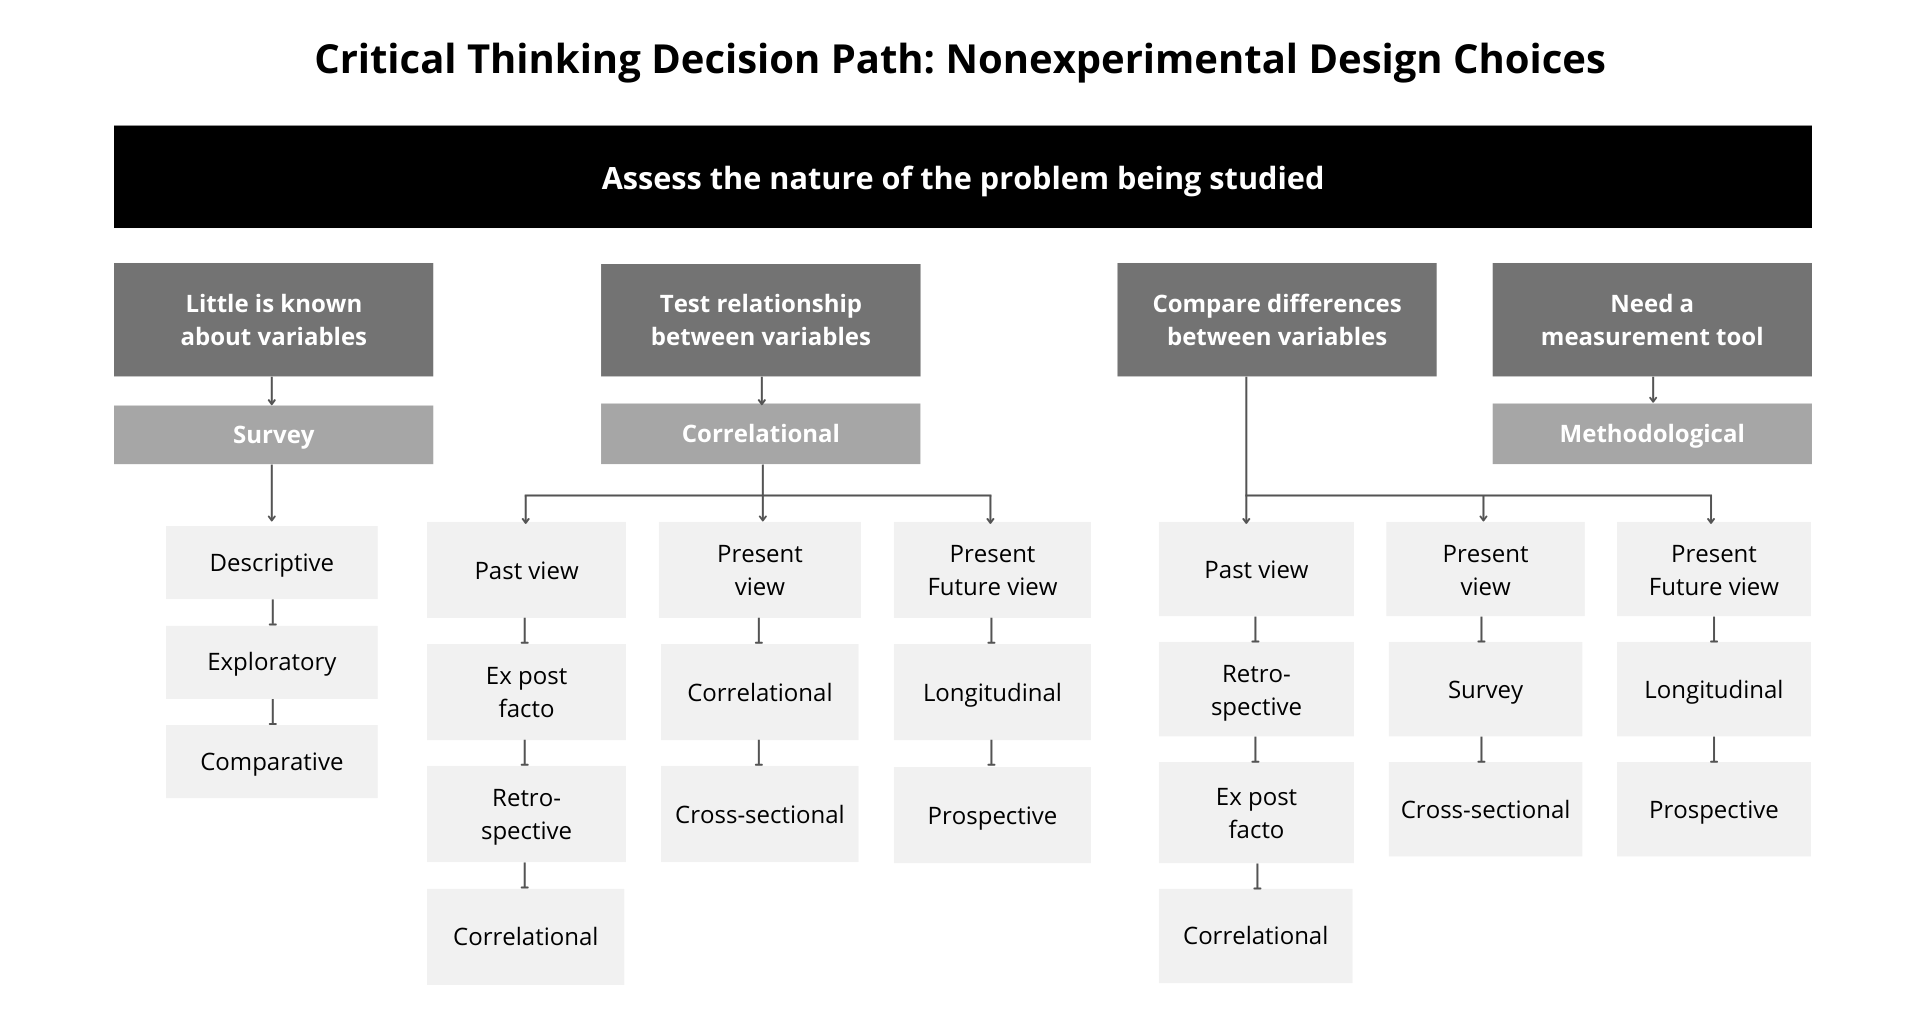 Figure 11. Critical Thinking Decision Path: Nonexperimental Design Choices. Copyright 2018. Elsevier Canada, a division of Reed Elsevier Canada Ltd.